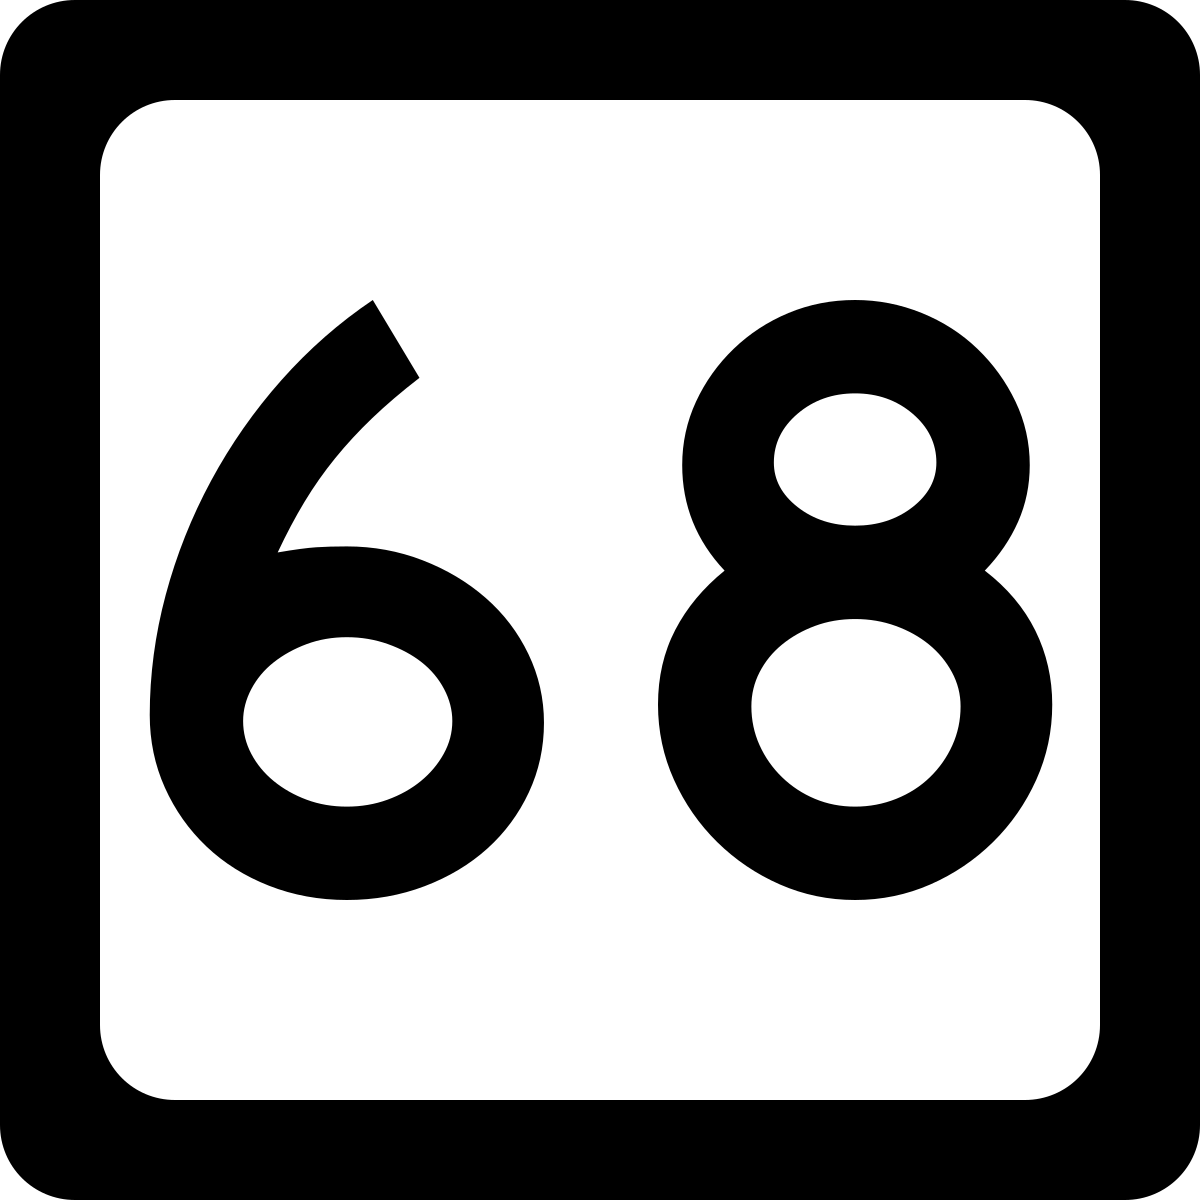 West Virginia Route 68 - Wikipedia